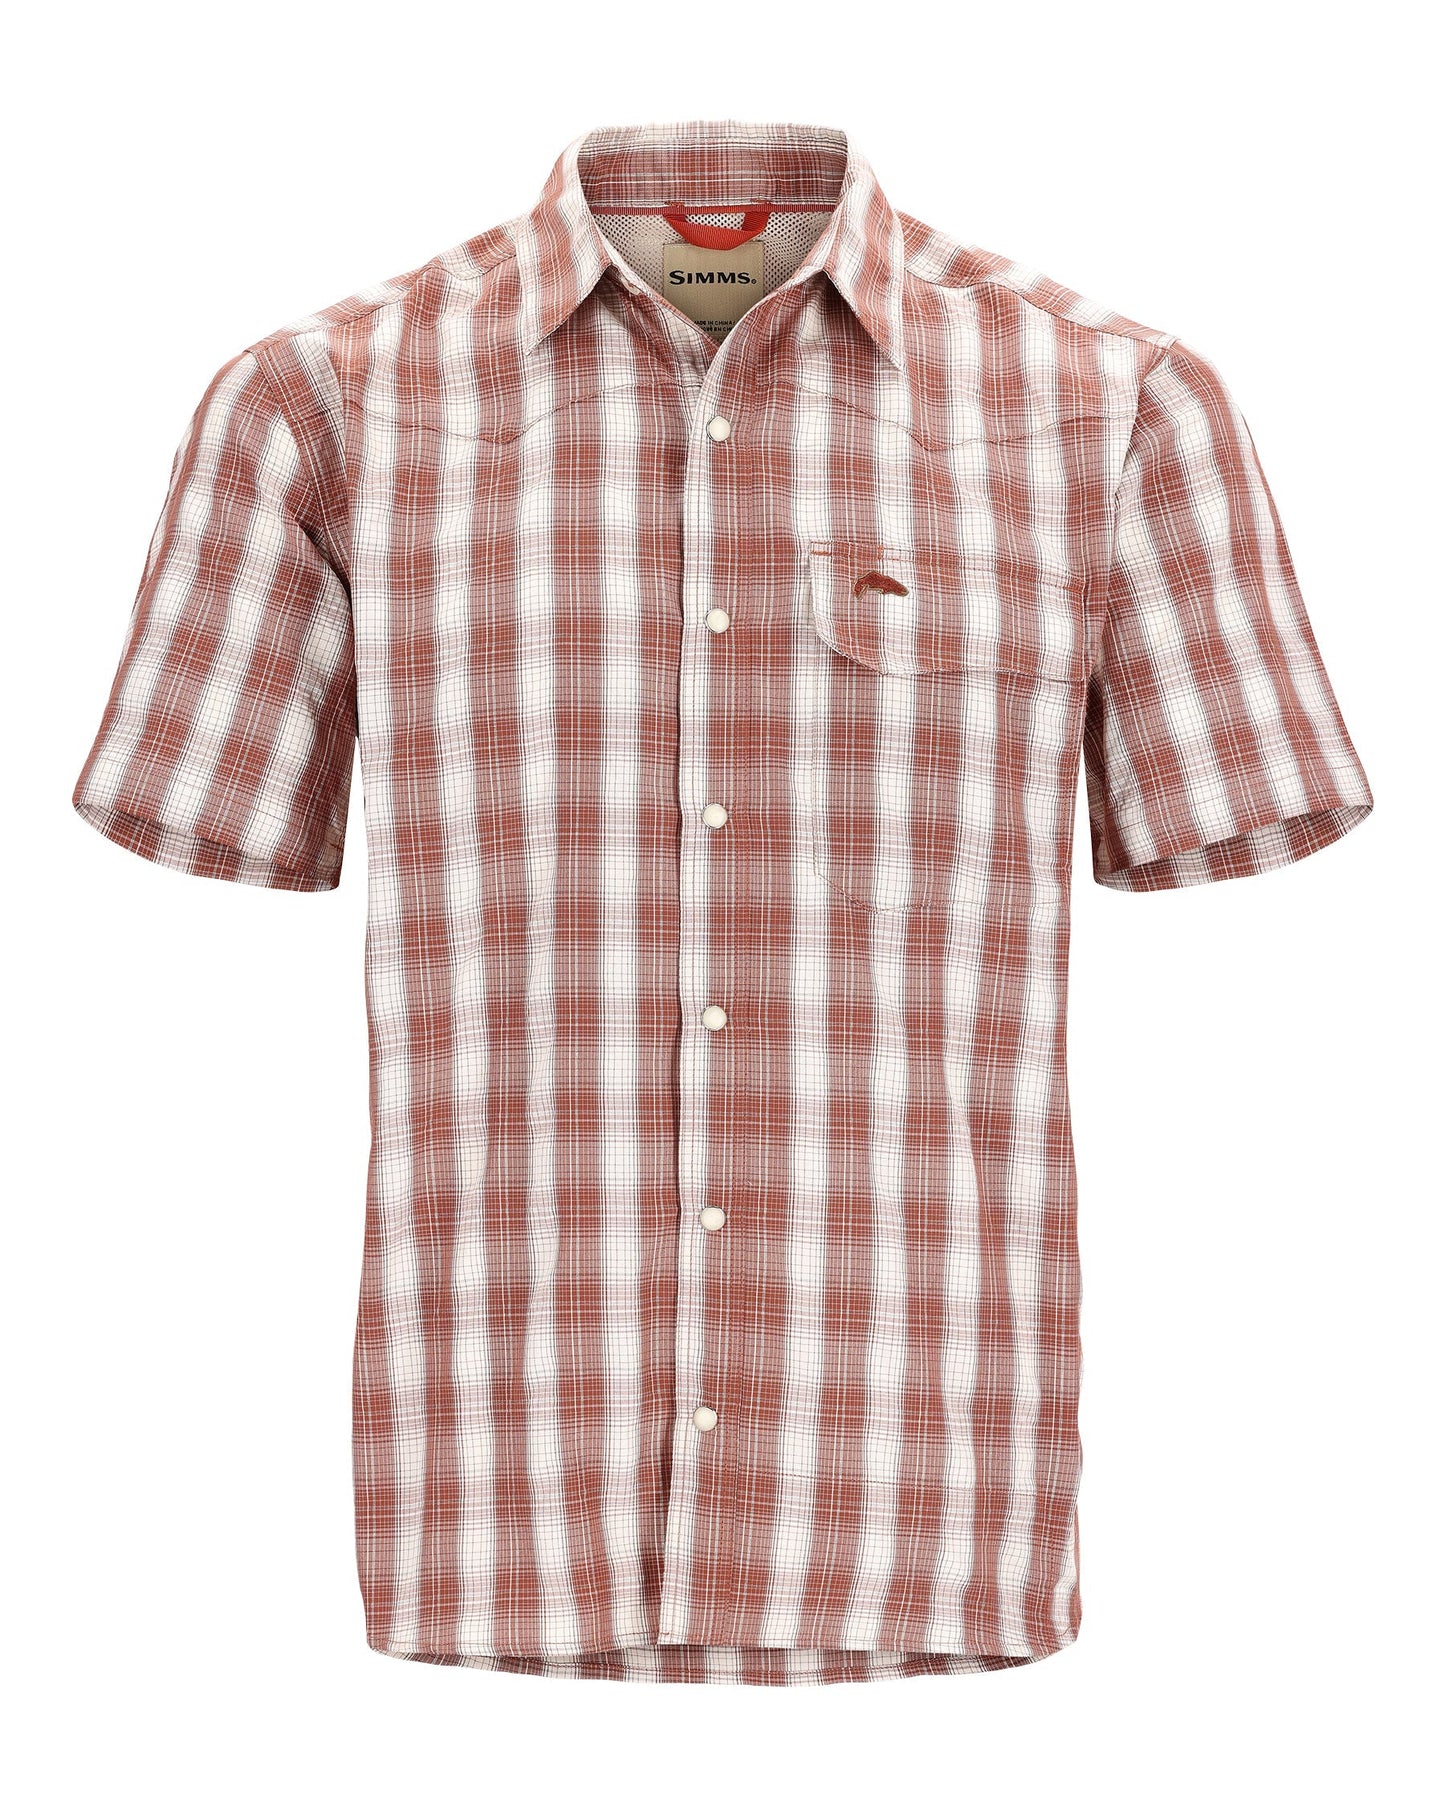 M'S BIG SKY SS SHIRT CLAY/HICKORY PLAID-on-mannequin